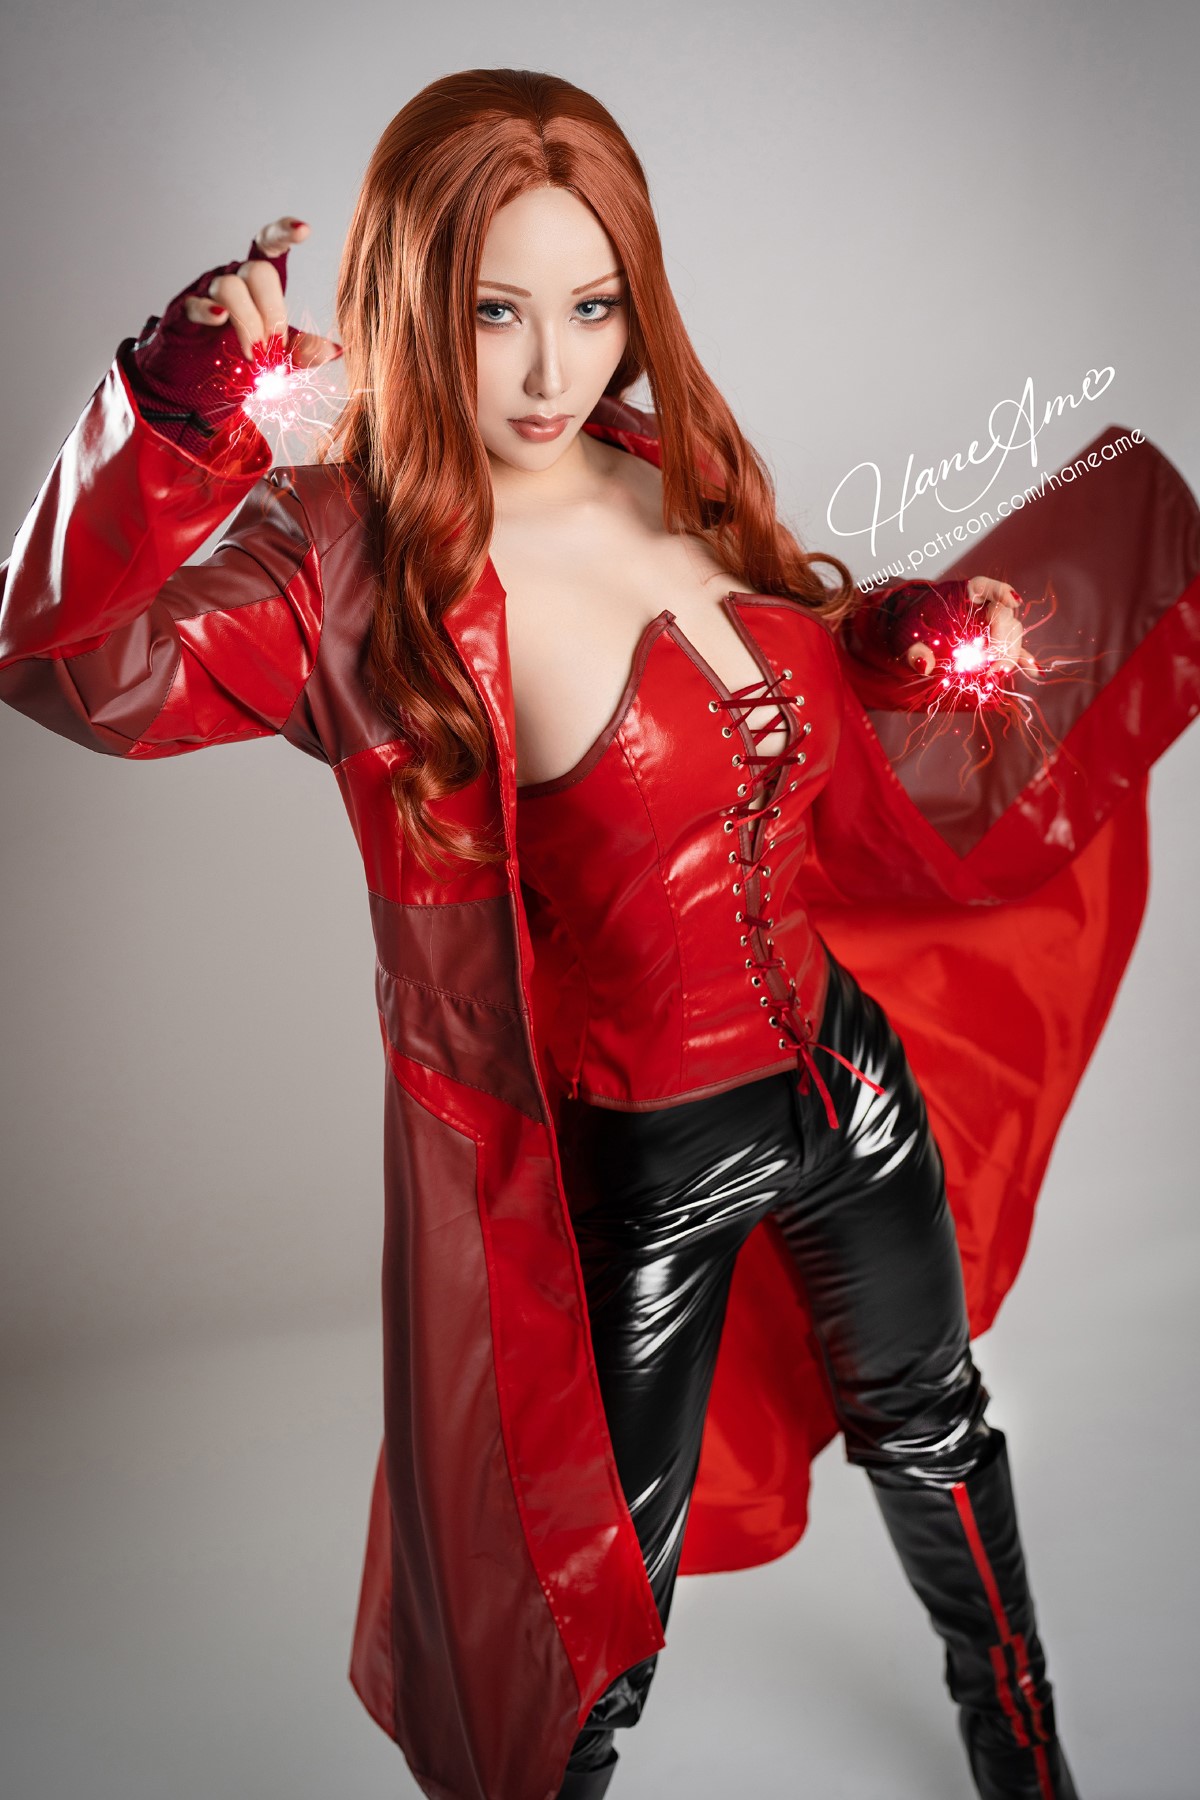 Coser@HaneAme Scarlet Witch 0025 1916737559.jpg